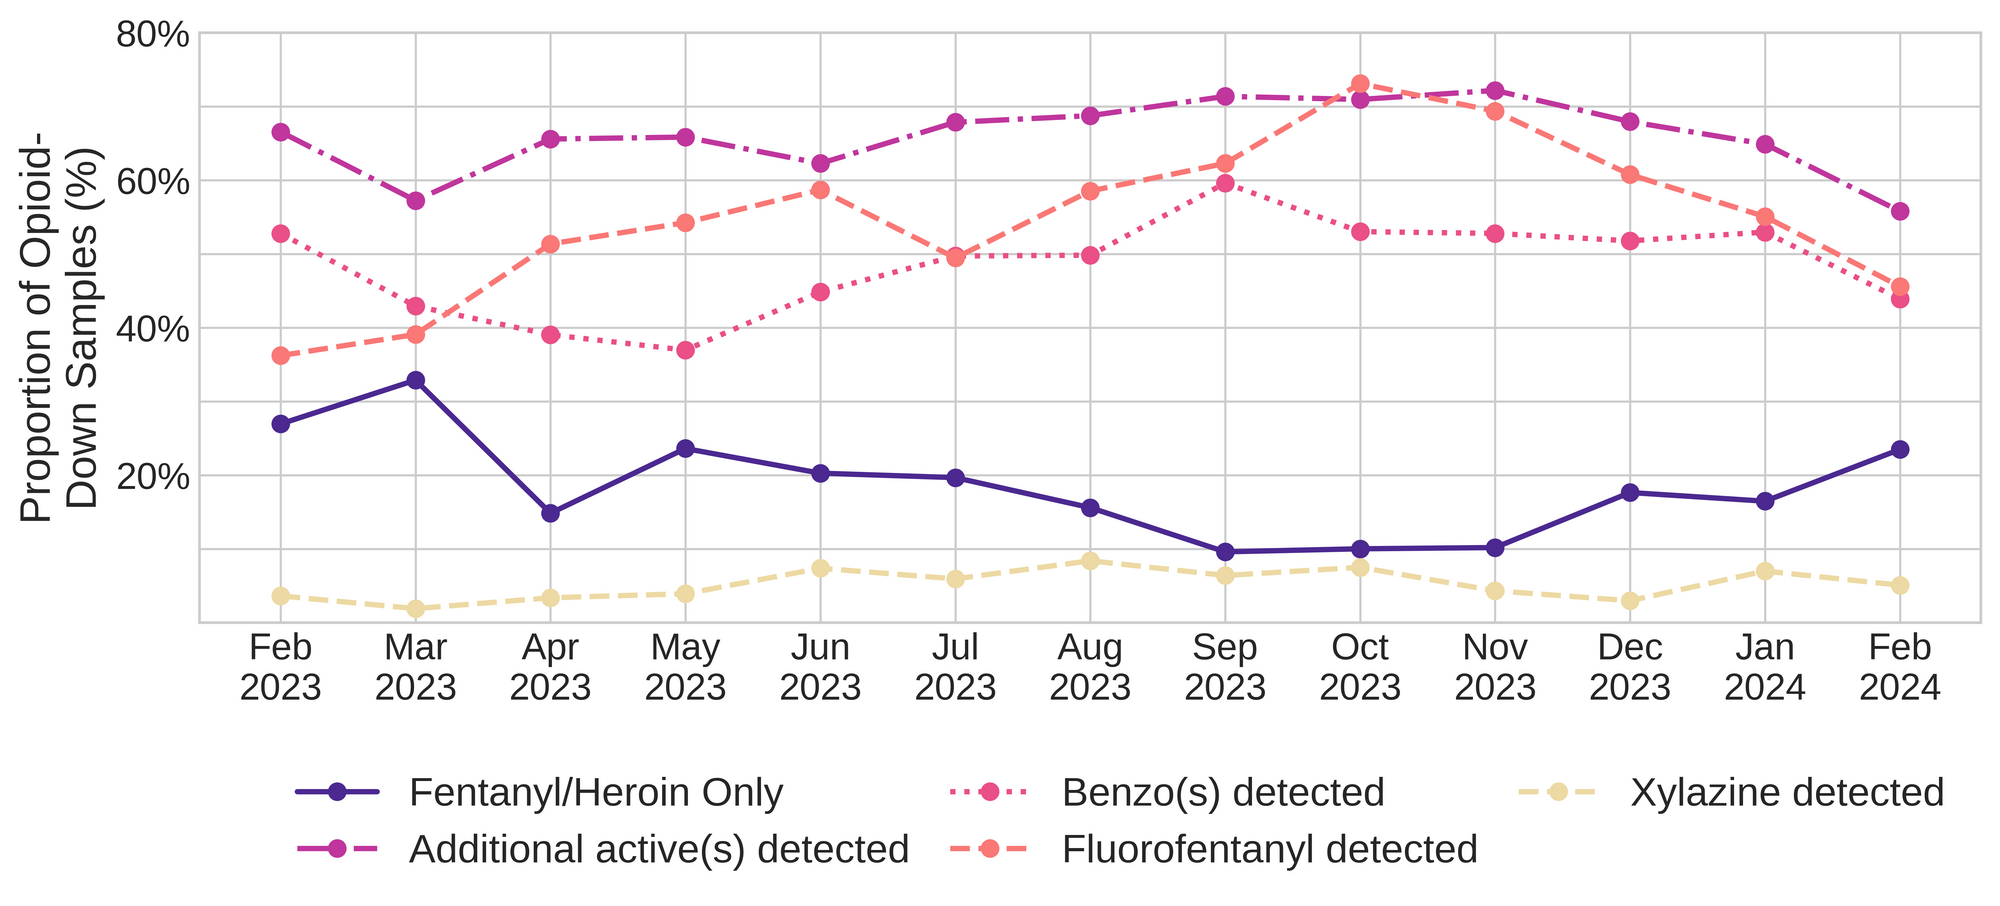 Figure 3. The percentage of expected opioid-down samples checked between February 2023 and February 2024 that only contained fentanyl/heroin actives (solid dark purple), opioid-down samples with an additional active detected (dot-dashed light purple), opioid-down samples that contained a benzodiazepine-related drug (dotted magenta), opioid-down samples that contained fluorofentanyl (dashed salmon), and opioid-down samples that contained xylazine (dashed yellow).